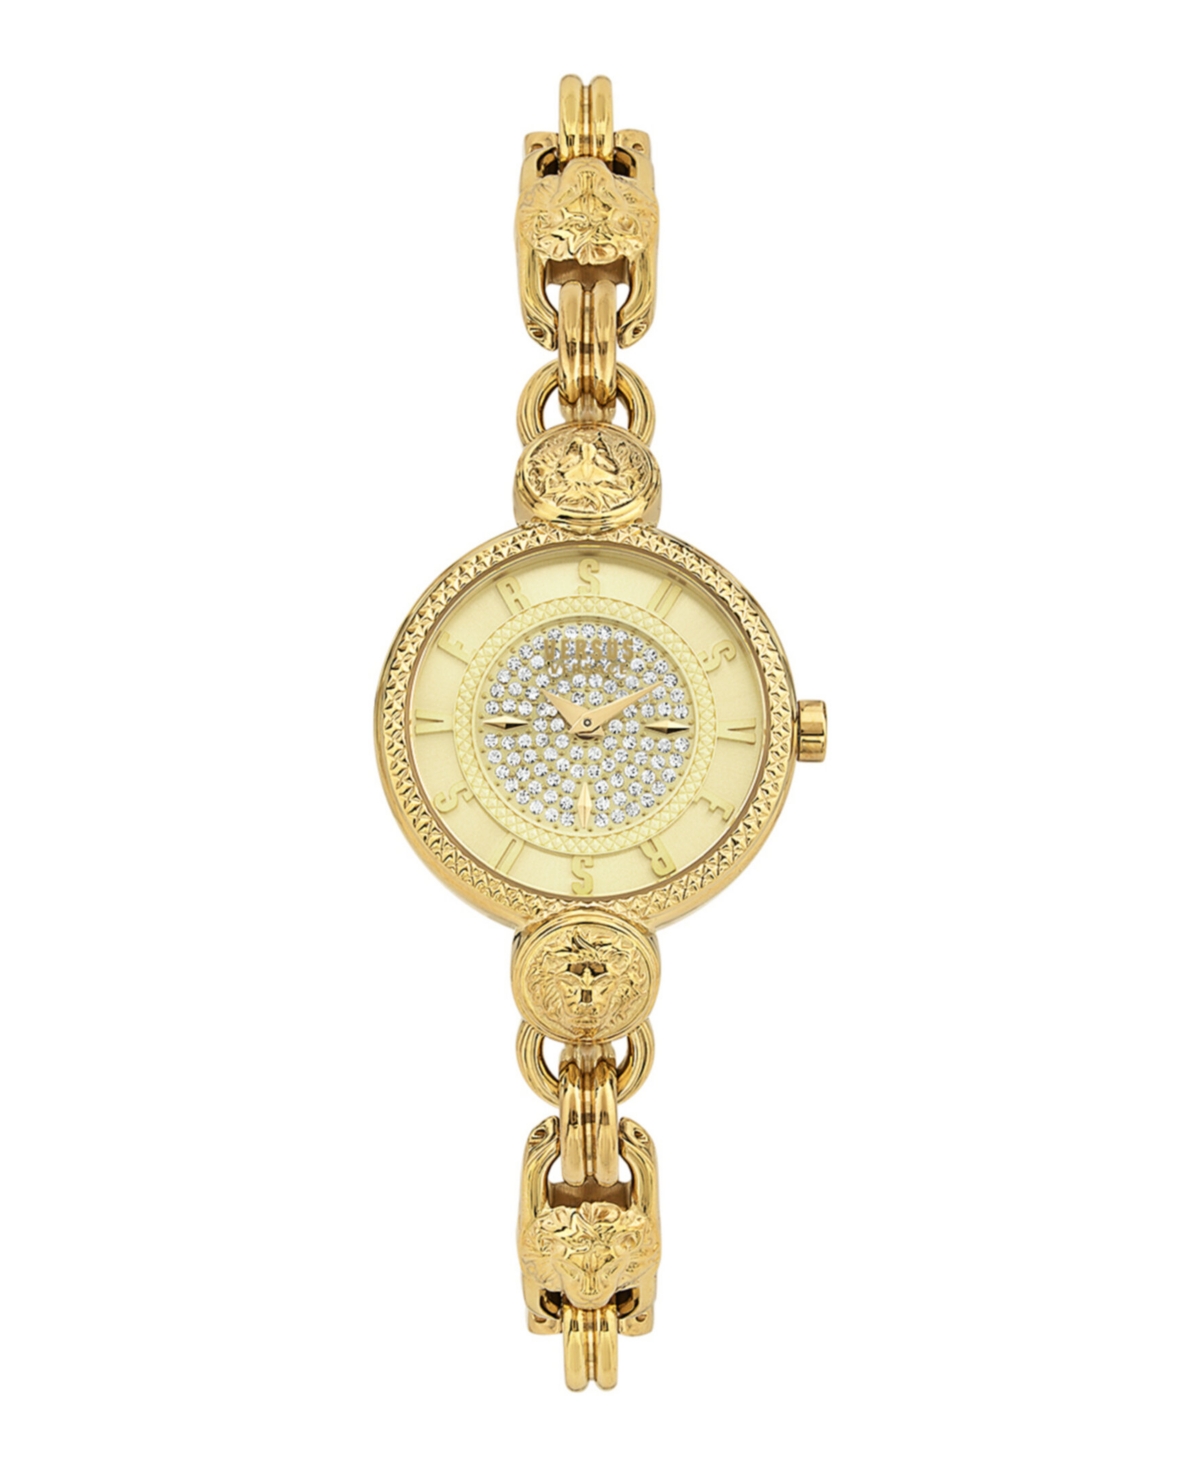 Women's Les Docks Petite 2 Hand Quartz Gold-Tone Stainless Steel Watch, 30mm - Ion Plating Yellow Gold